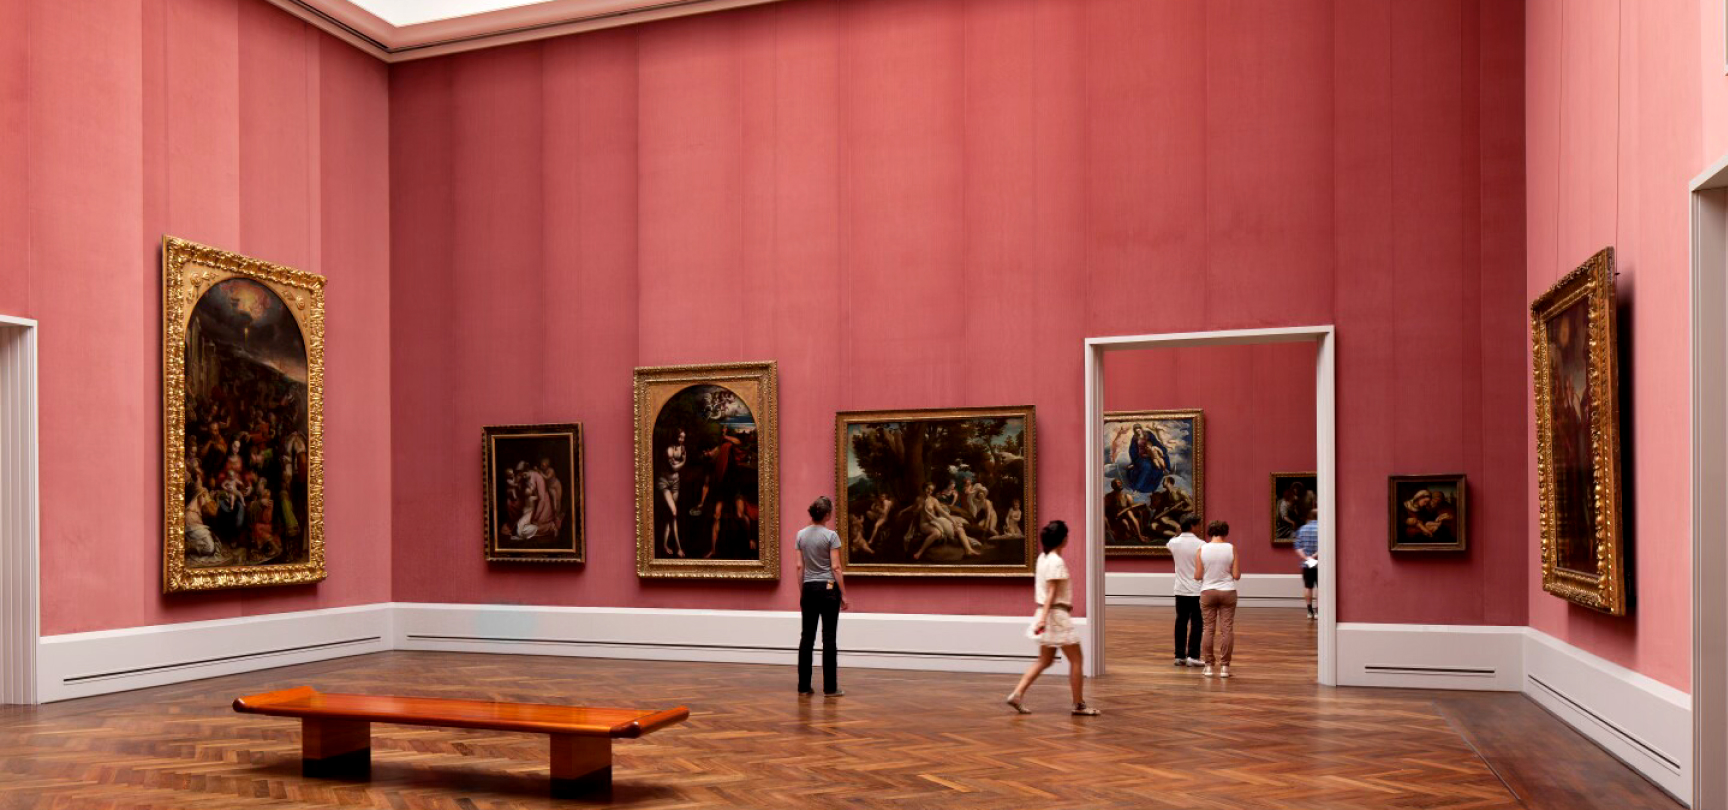 A spacious art gallery room with pink walls displaying various classical paintings in ornate gold frames. Several visitors are observing the artwork. The floor is parqueted wood, and there is a wooden bench in the foreground. Doorways lead to additional rooms.